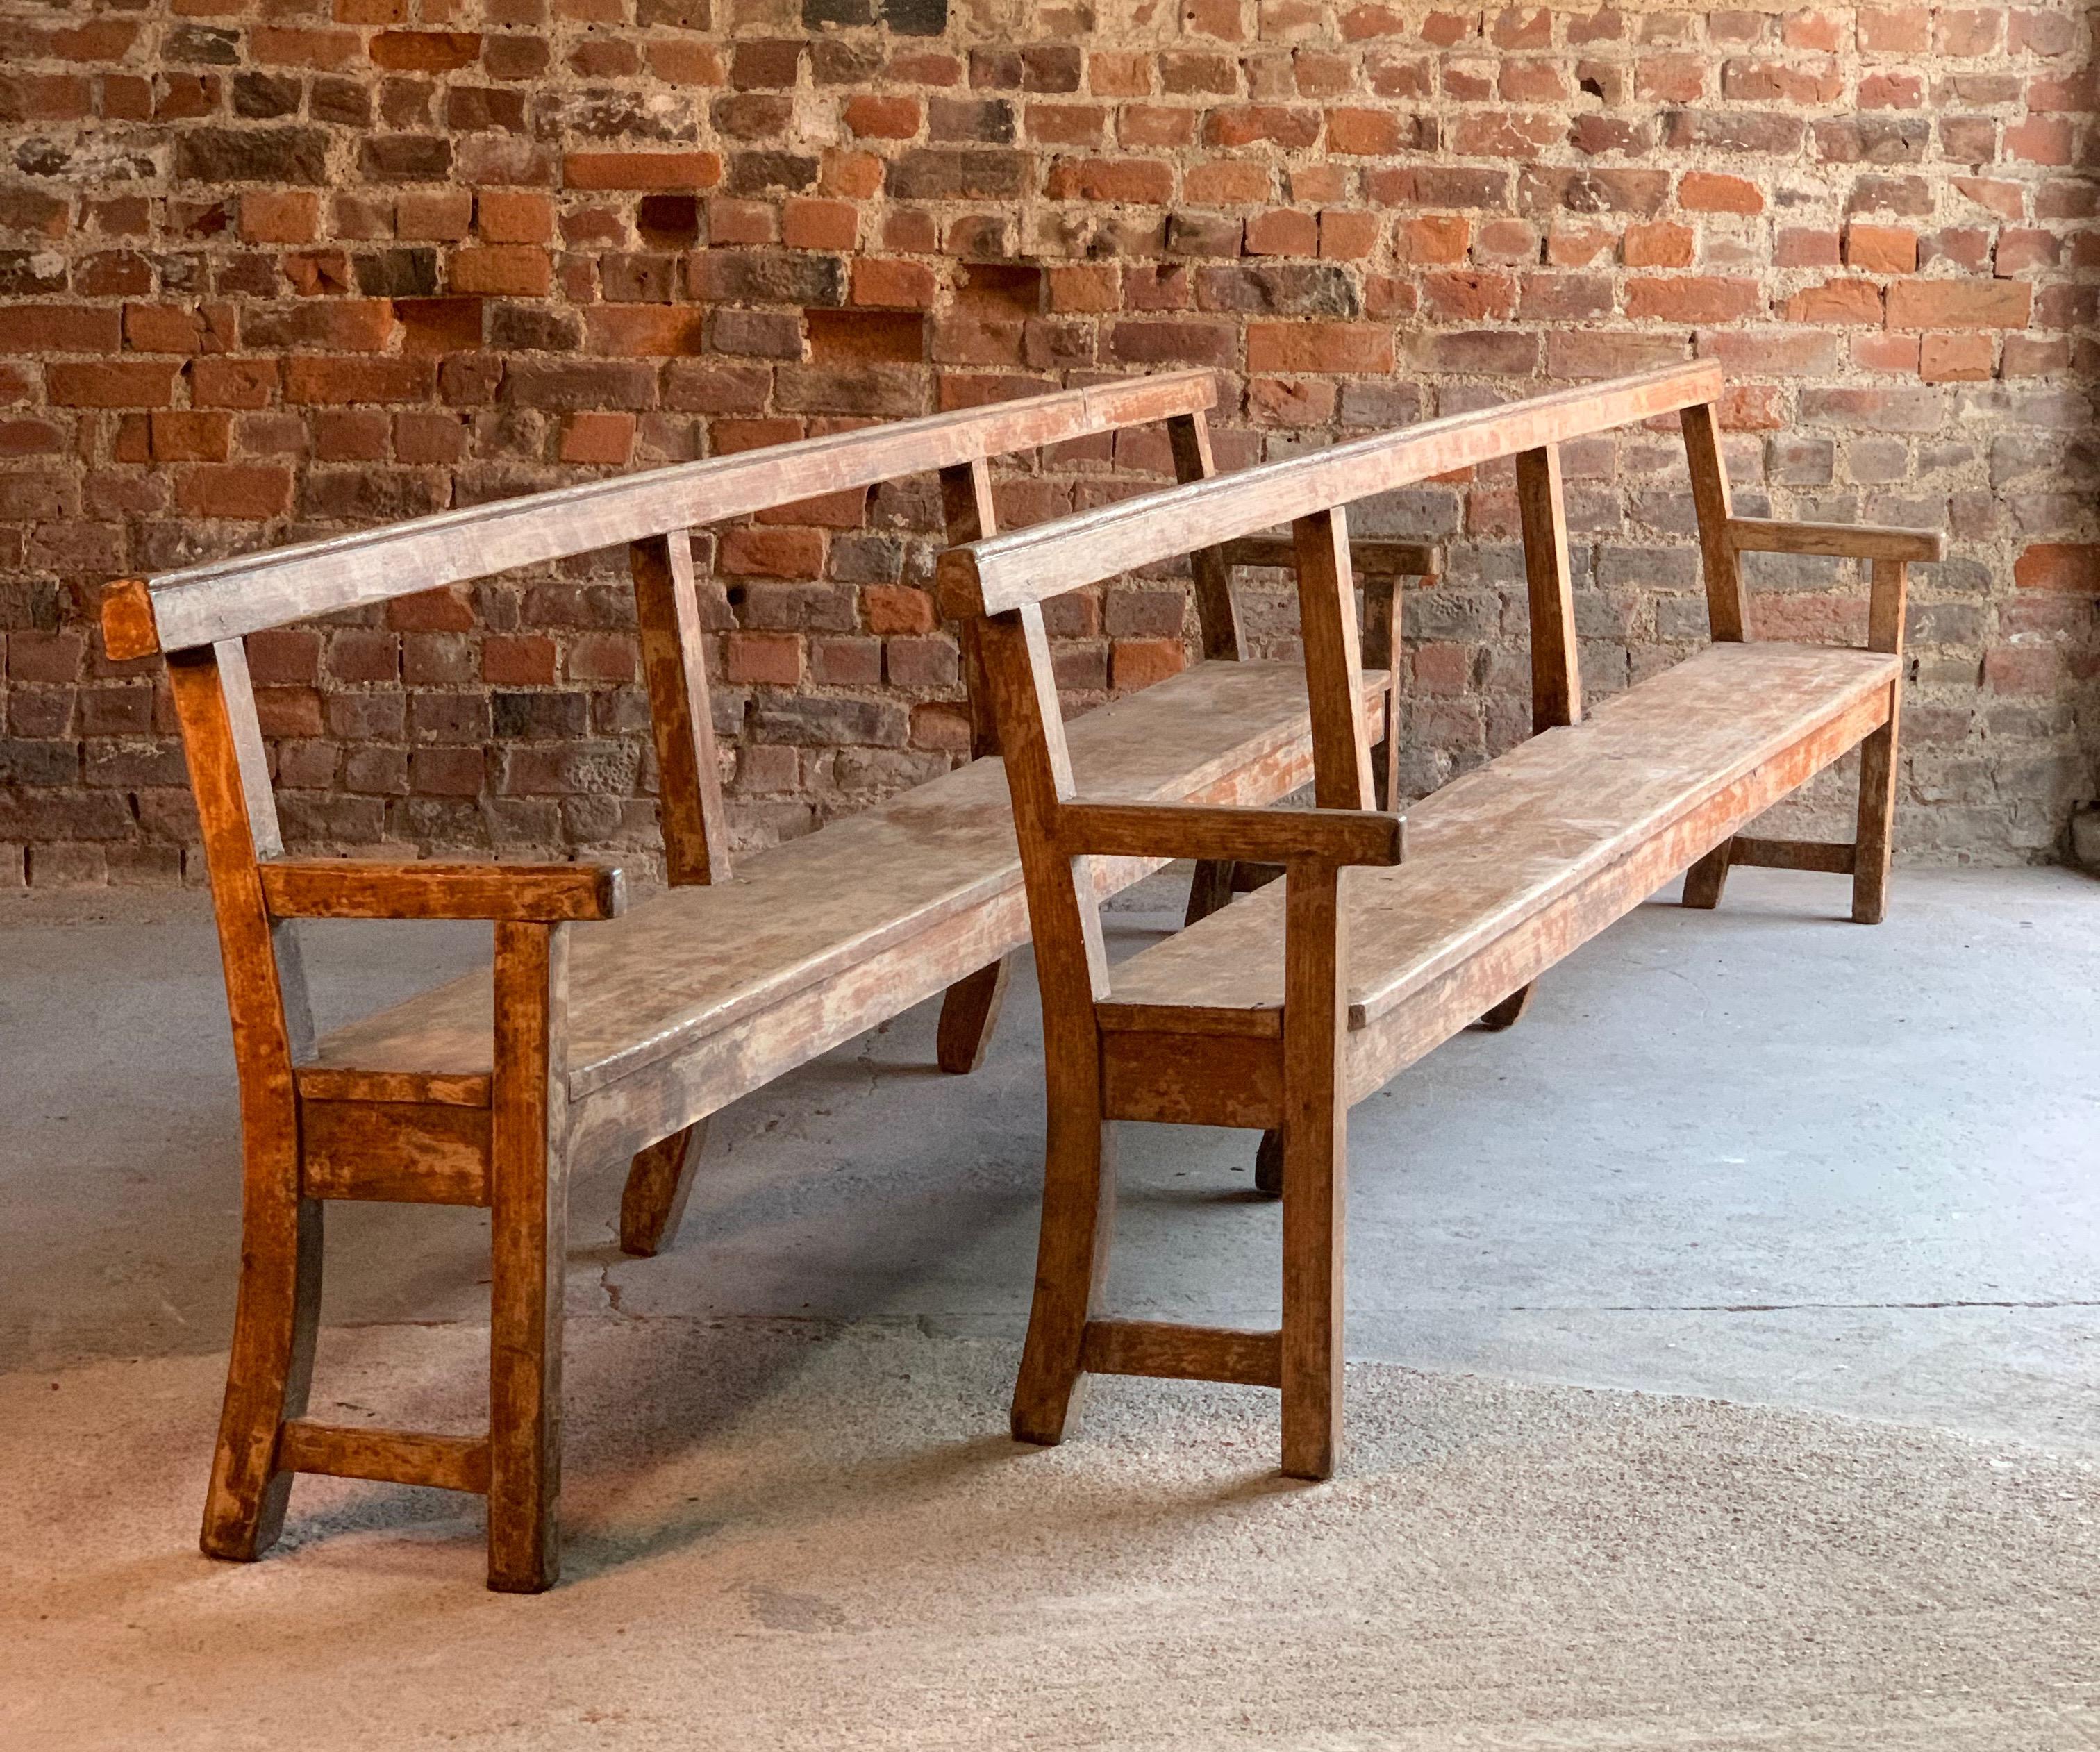 Antique French oak benches pair long painted distressed 19th century circa 1890

Magnificent pair of 19th century French distressed painted oak benches circa 1890, both benches with a wonderful aged and weathered look, extremely comfortable and